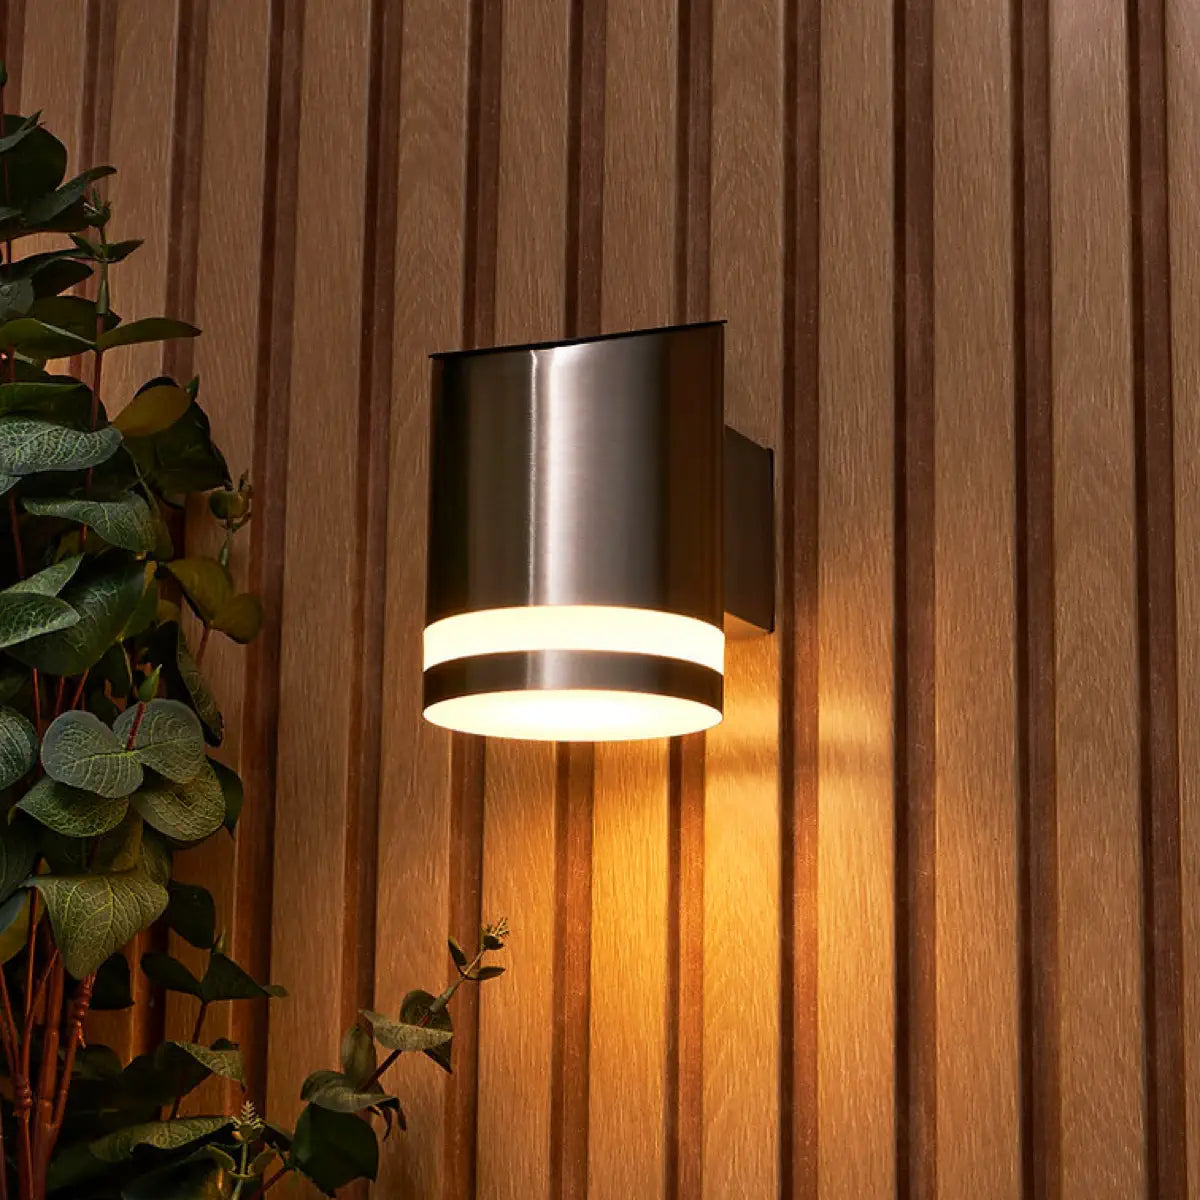 A sleek, modern, cylindrical solar-powered outdoor wall light with a brushed metal finish, emitting a warm glow. The light is mounted on a vertical wooden panel wall with a striped pattern. To the left of the light, there is a green plant with round leaves, adding a natural element to the scene. The light fixture casts a soft, inviting light, enhancing the warmth and texture of the wooden wall.